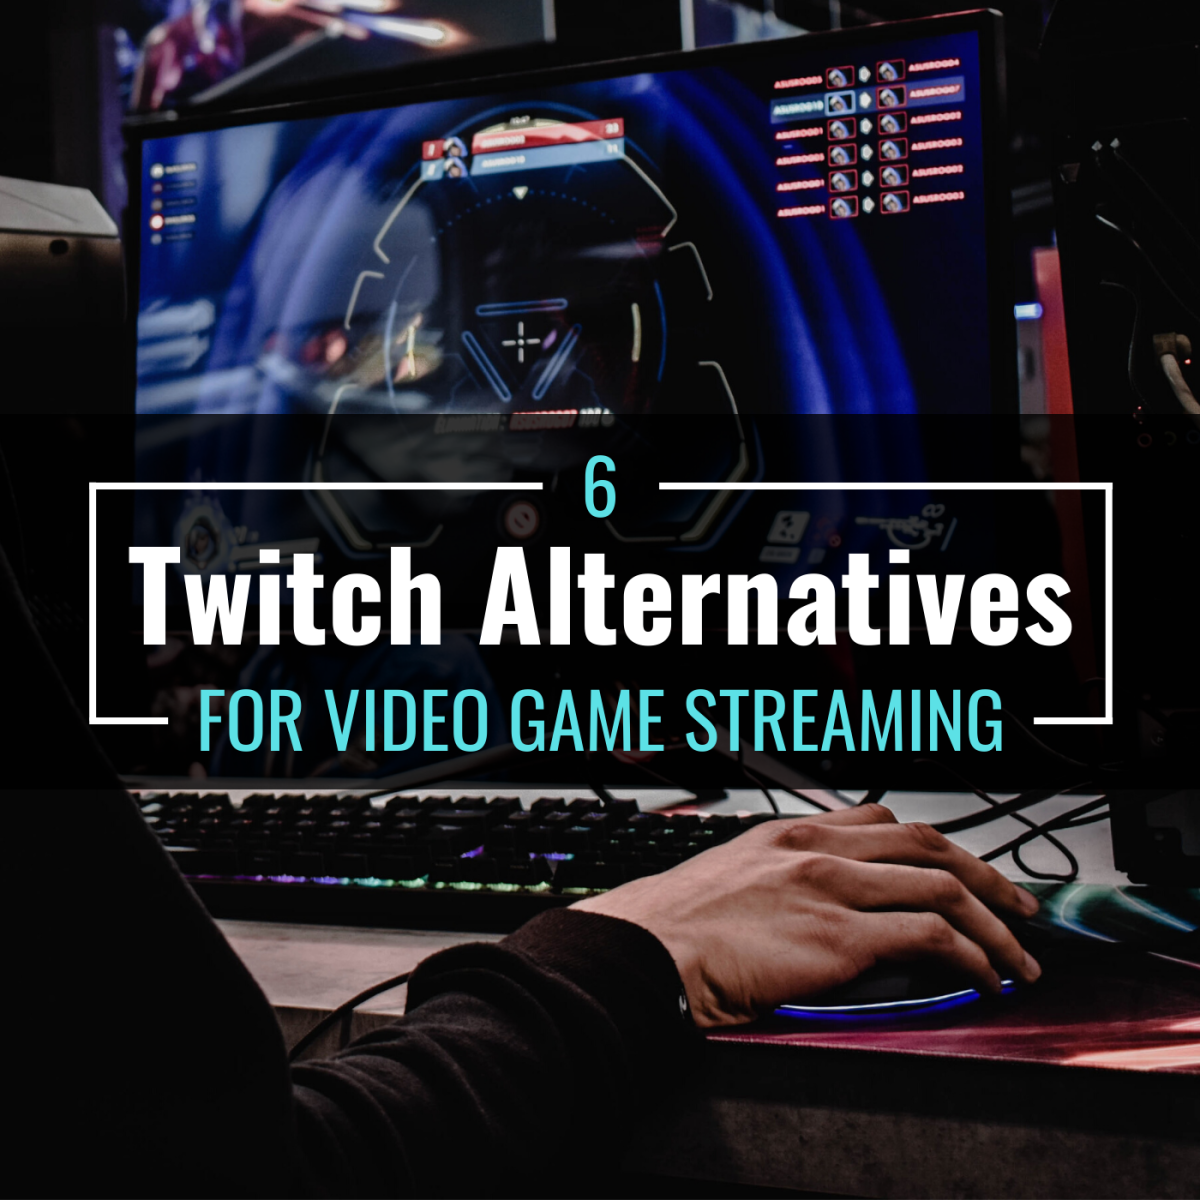 Twitch isn't the only player in the video game live-streaming industry. 